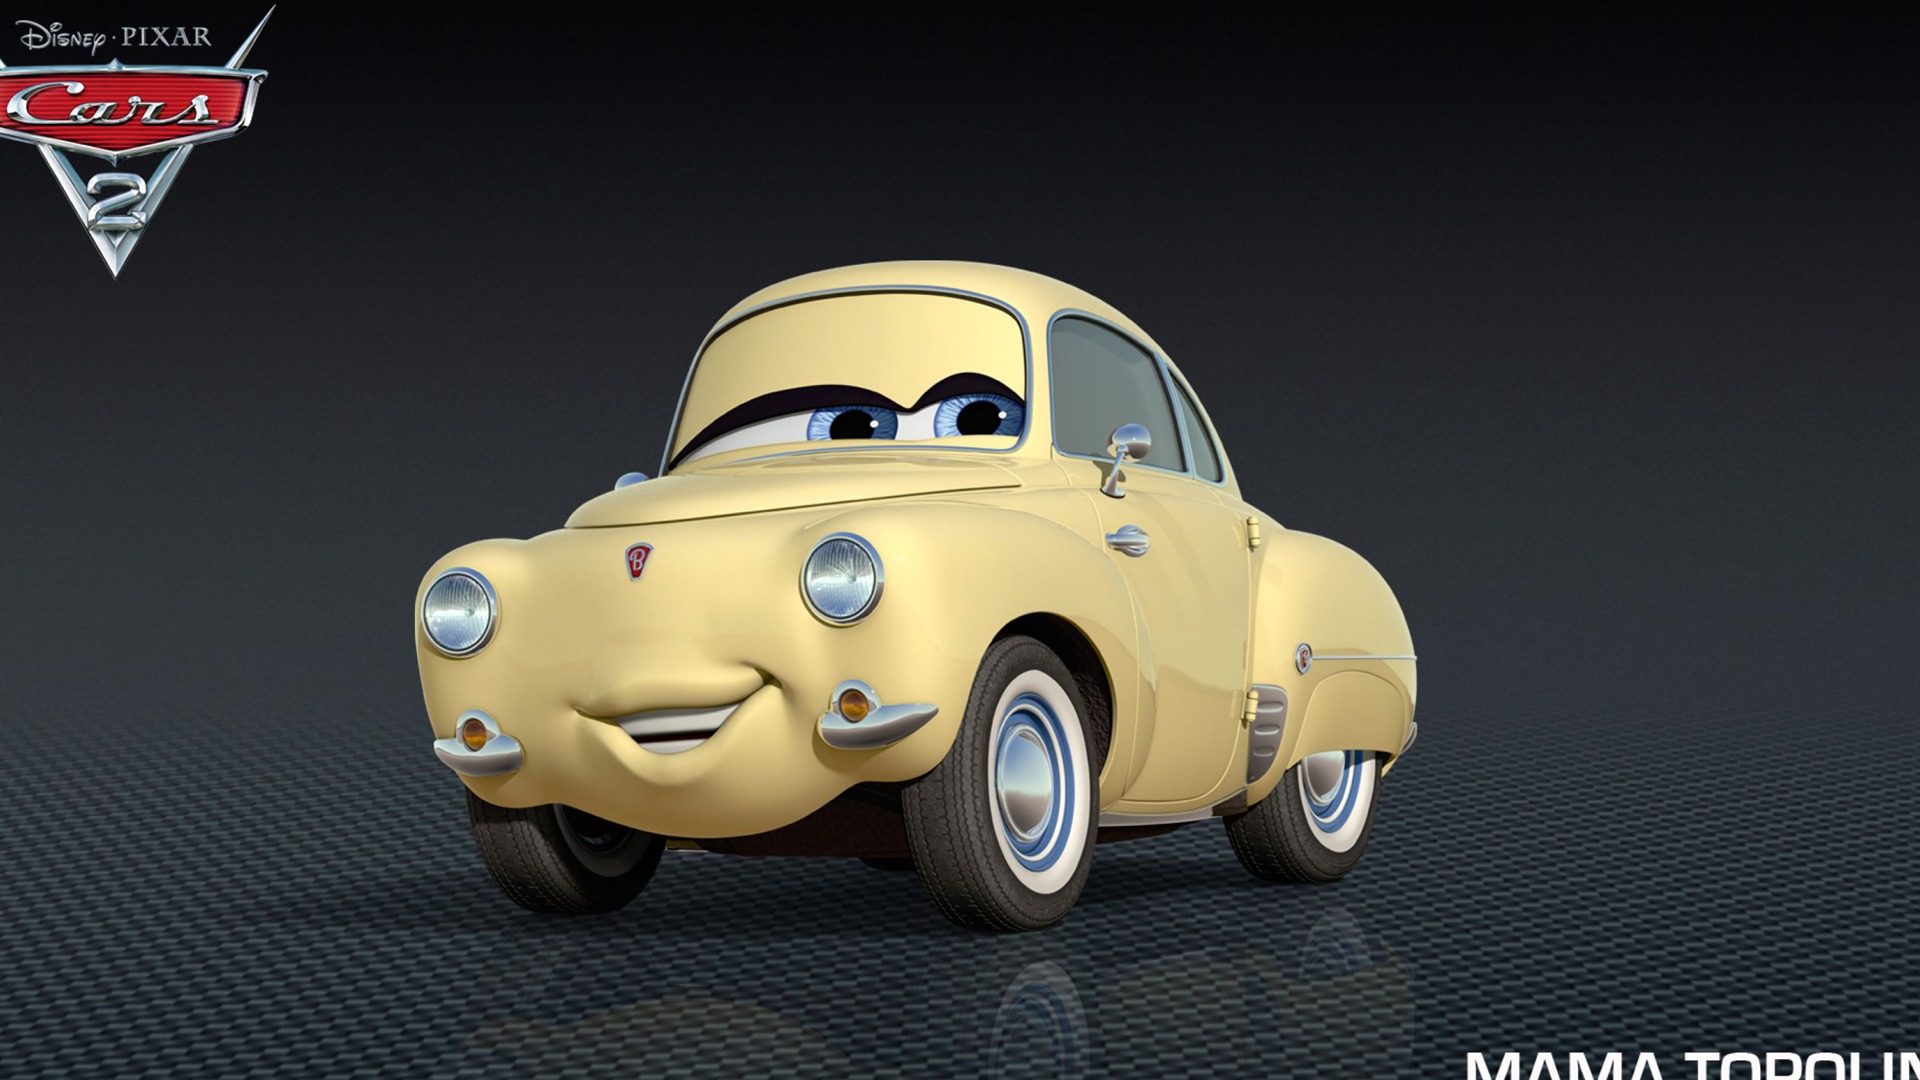 Cars 2 wallpapers #27 - 1920x1080